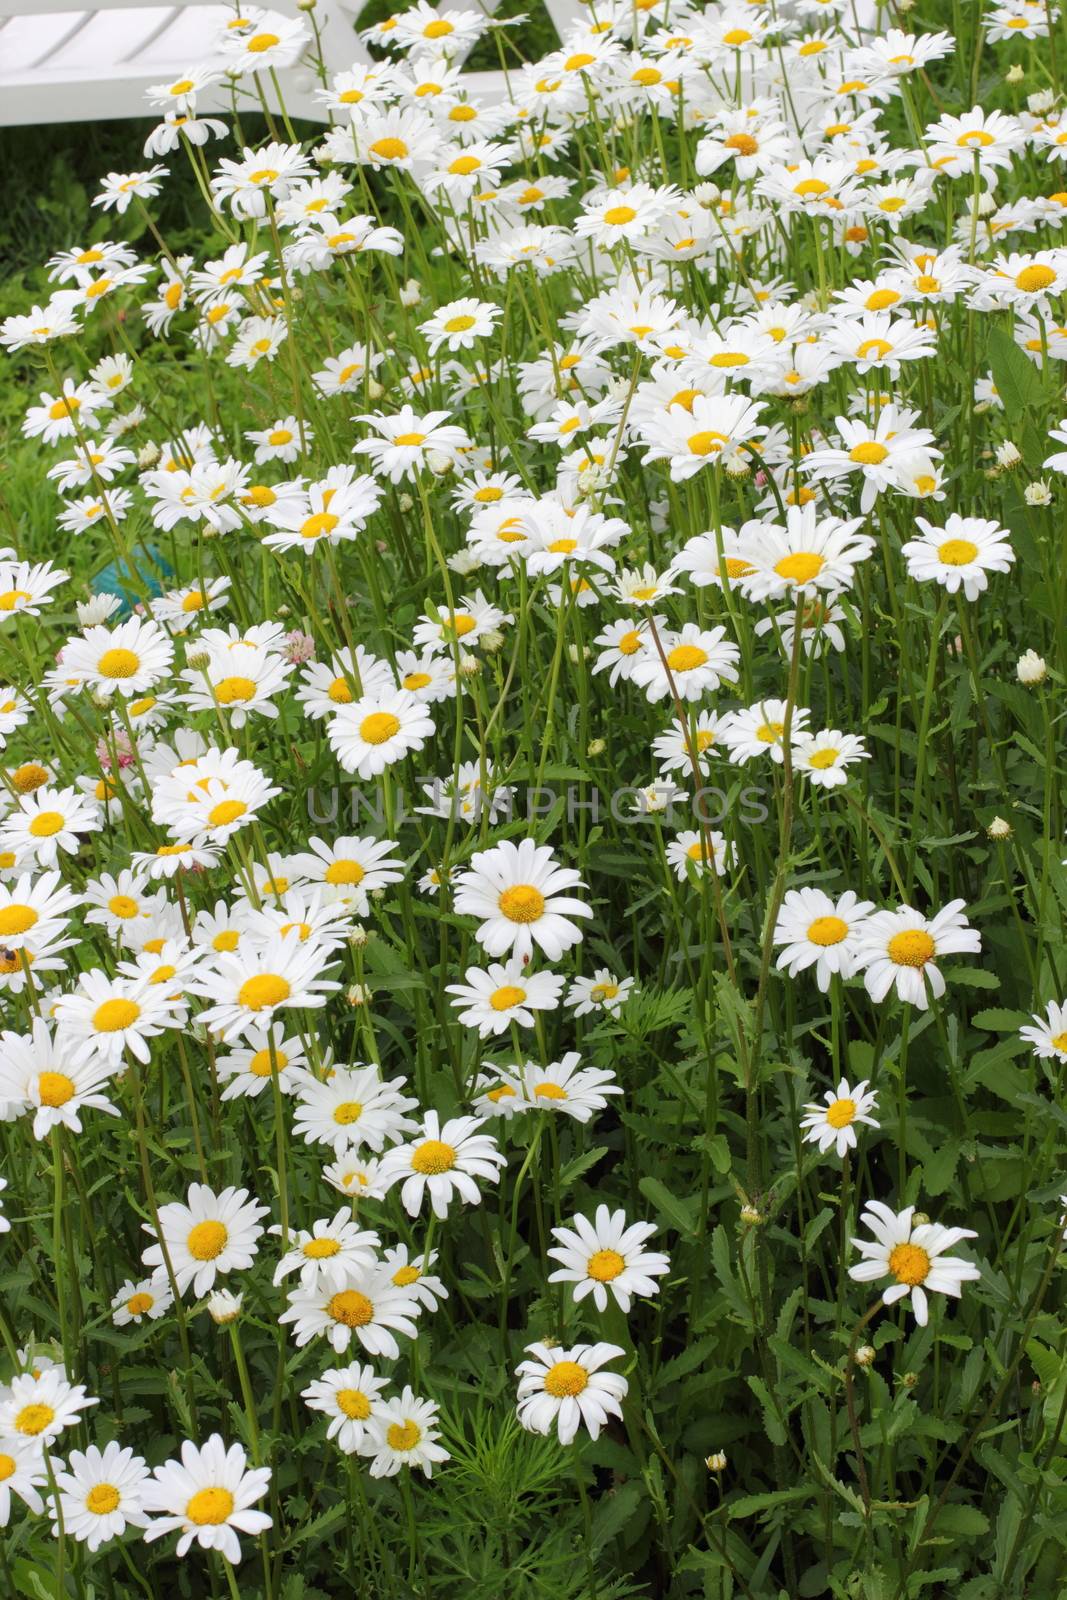 Many daisies in the garden Background of flowers